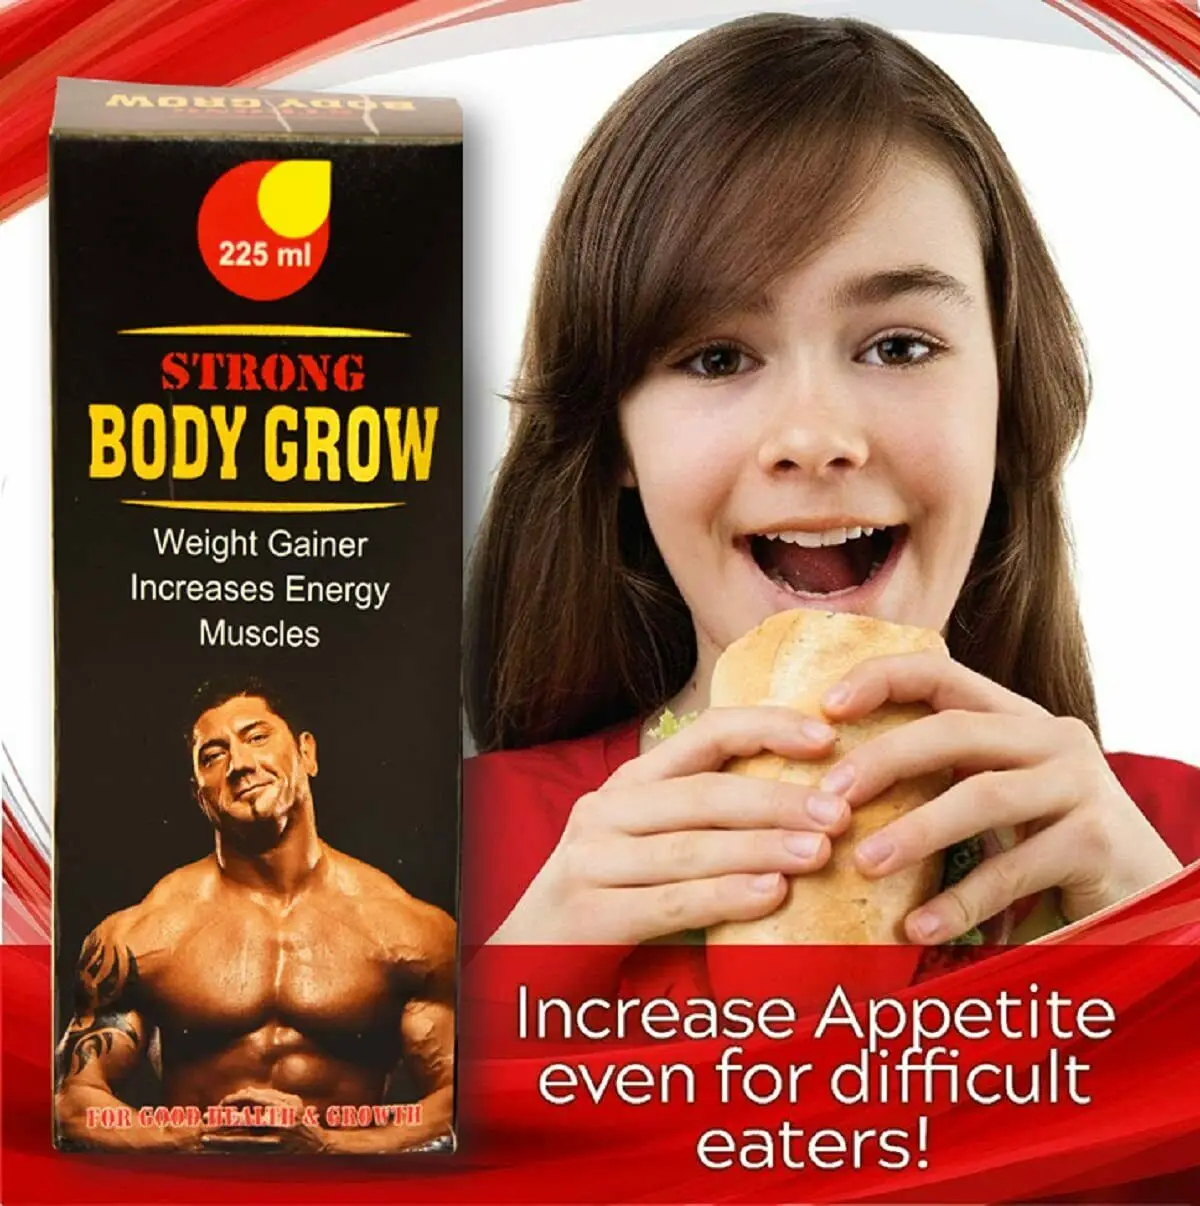 

Herbal Strong Body Grow Syrup Appetite Booster Weight Gain & Growth Energy Muscles 225ML